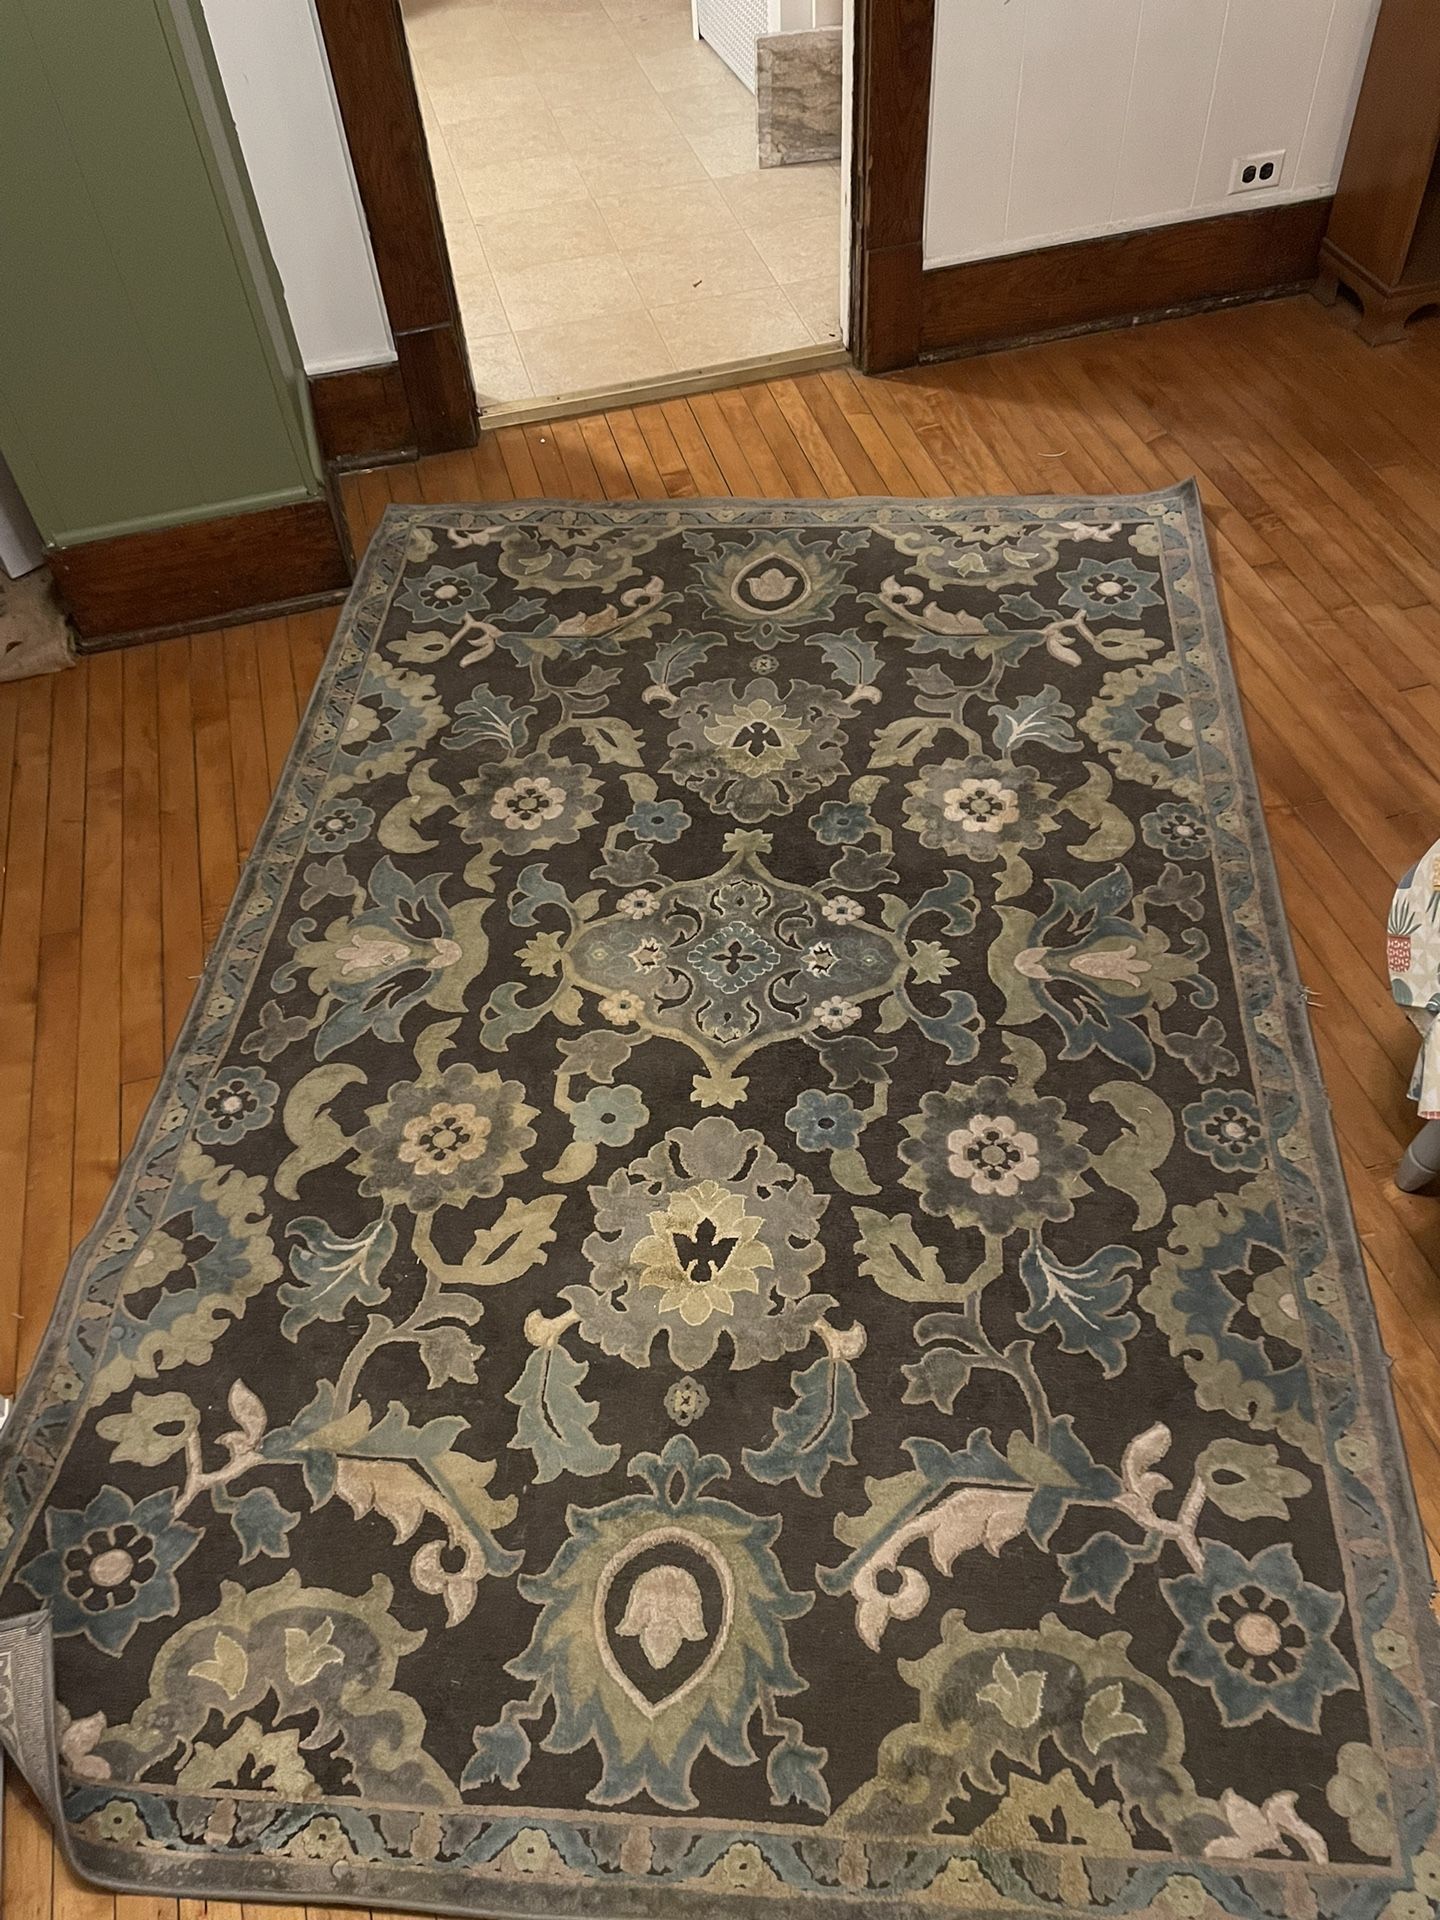 5x7 Patterned Area Rug